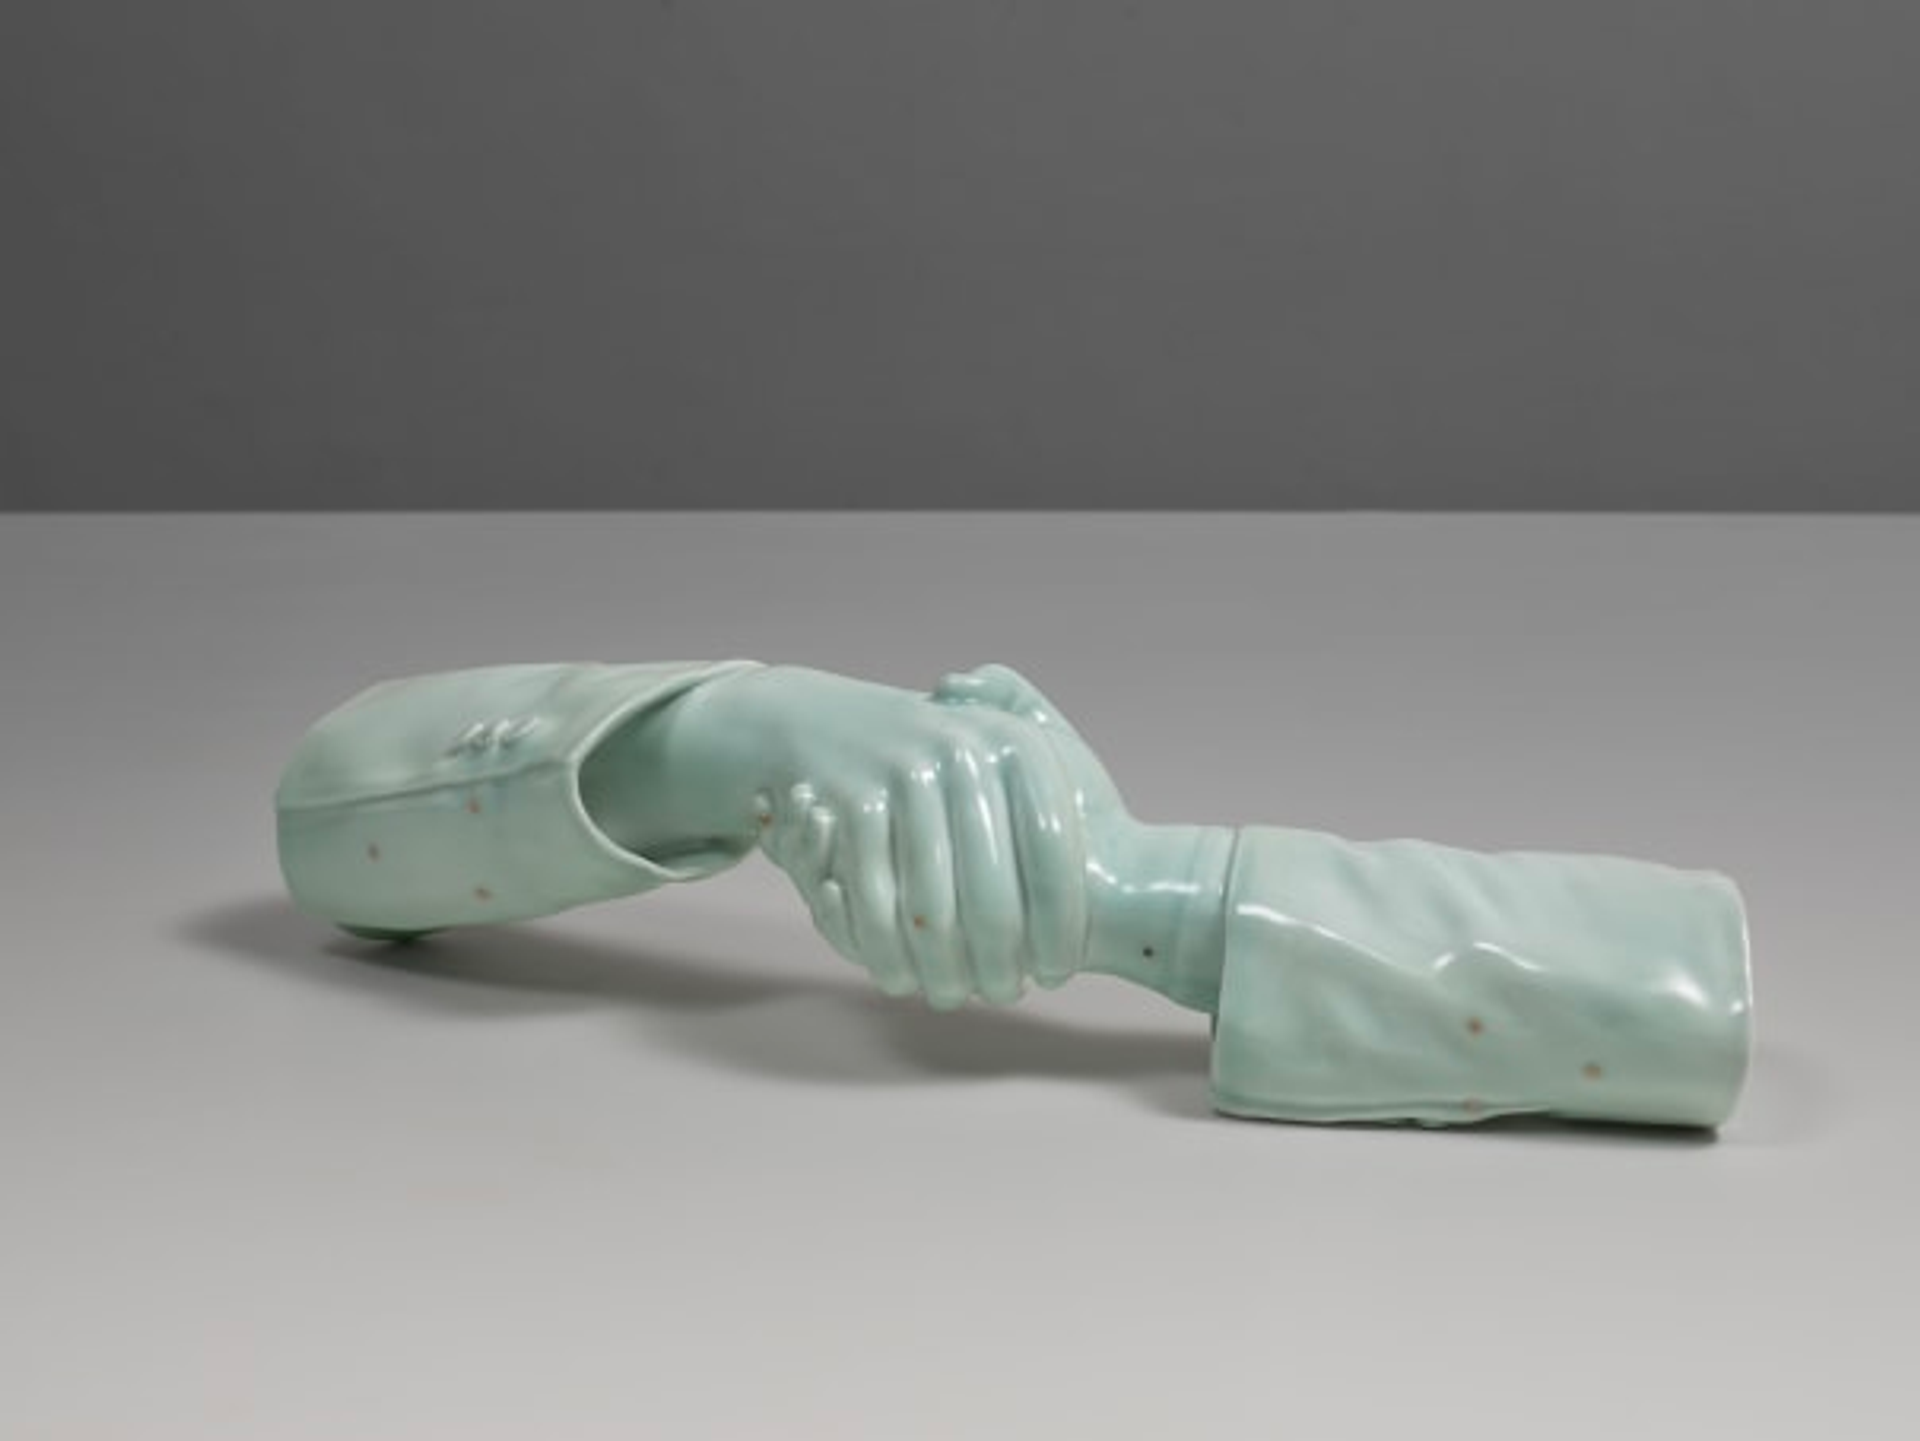 A green porcelain sculpture of two hands shaking